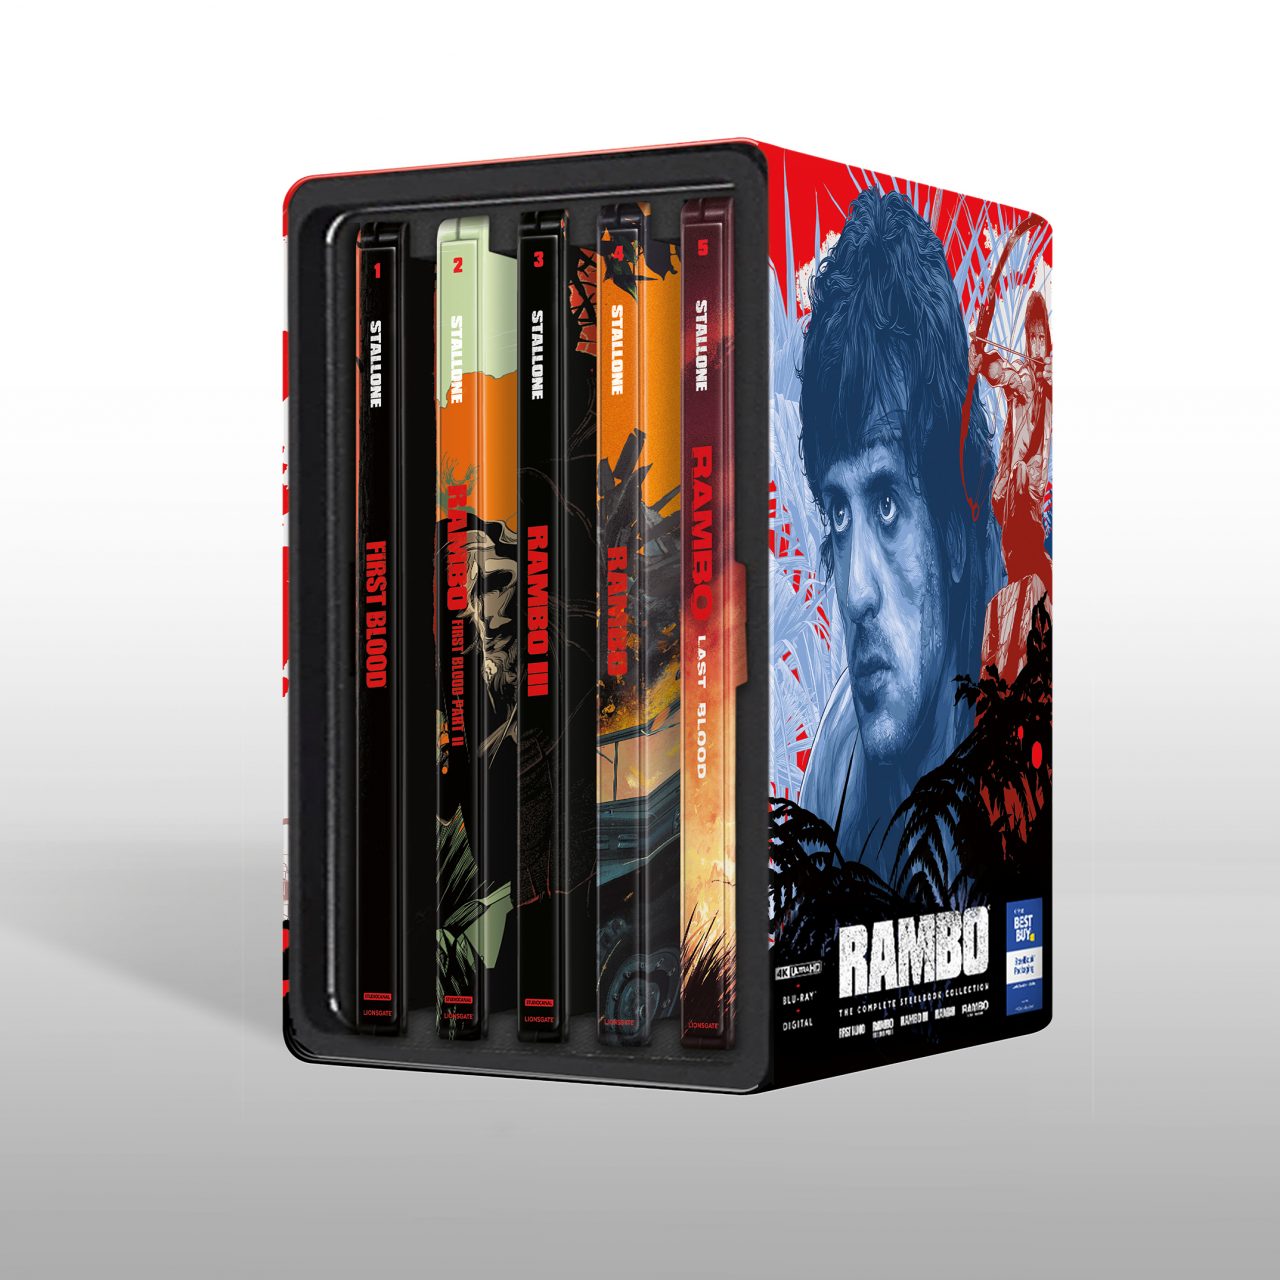 Rambo: The Complete SteelBook Collection cover (Lionsgate Home Entertainment)